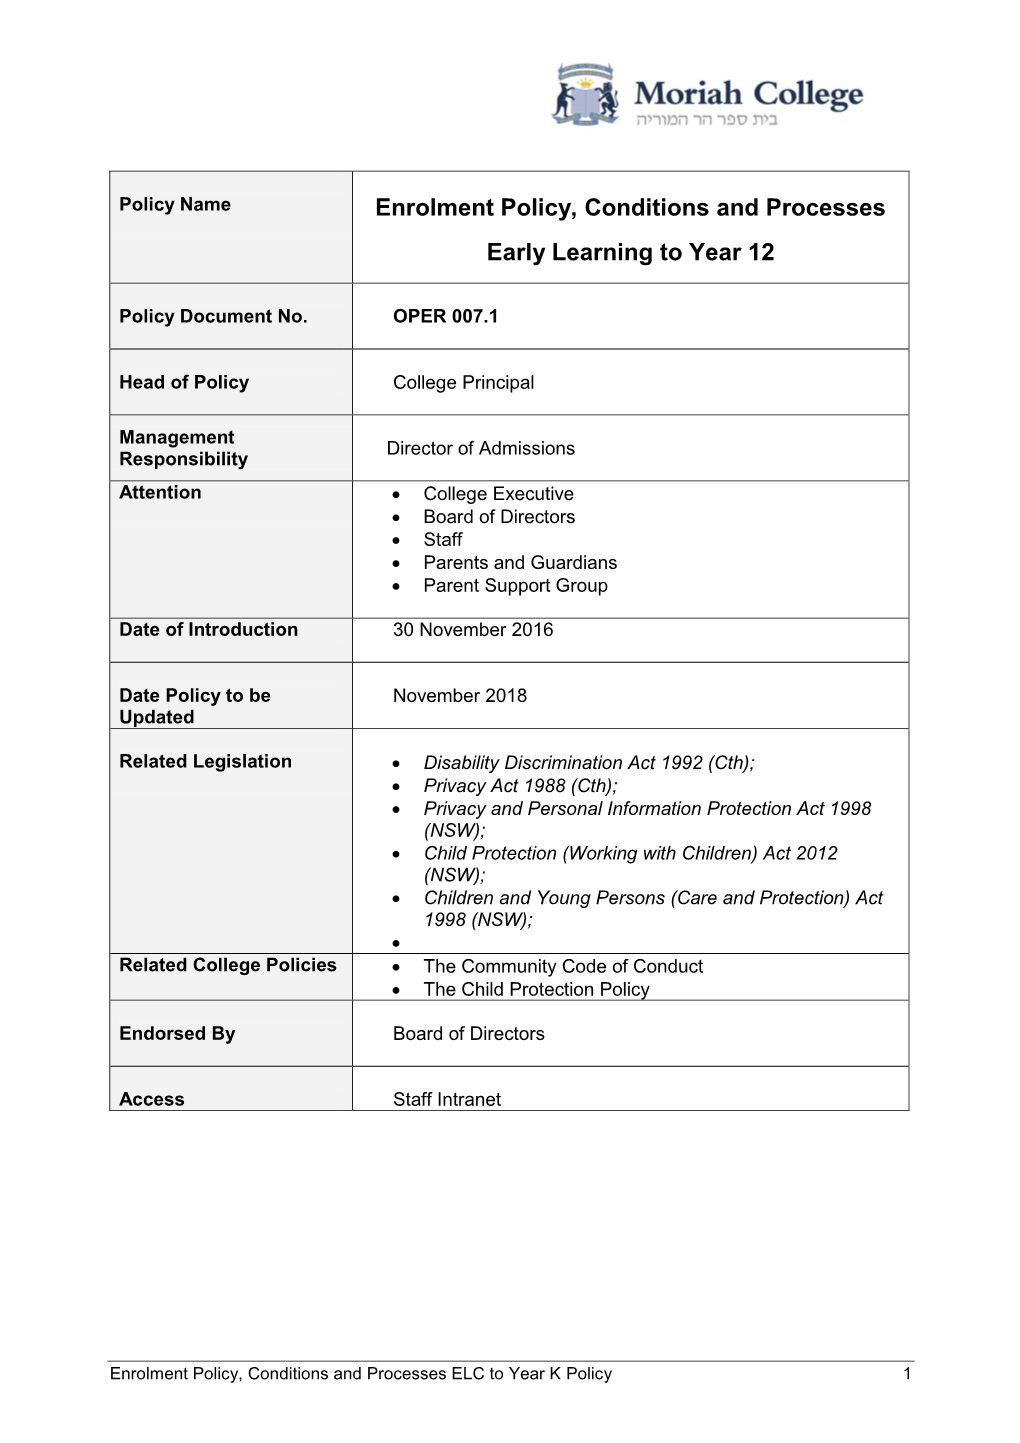 Enrolment Policy, Conditions and Processes Early Learning to Year 12